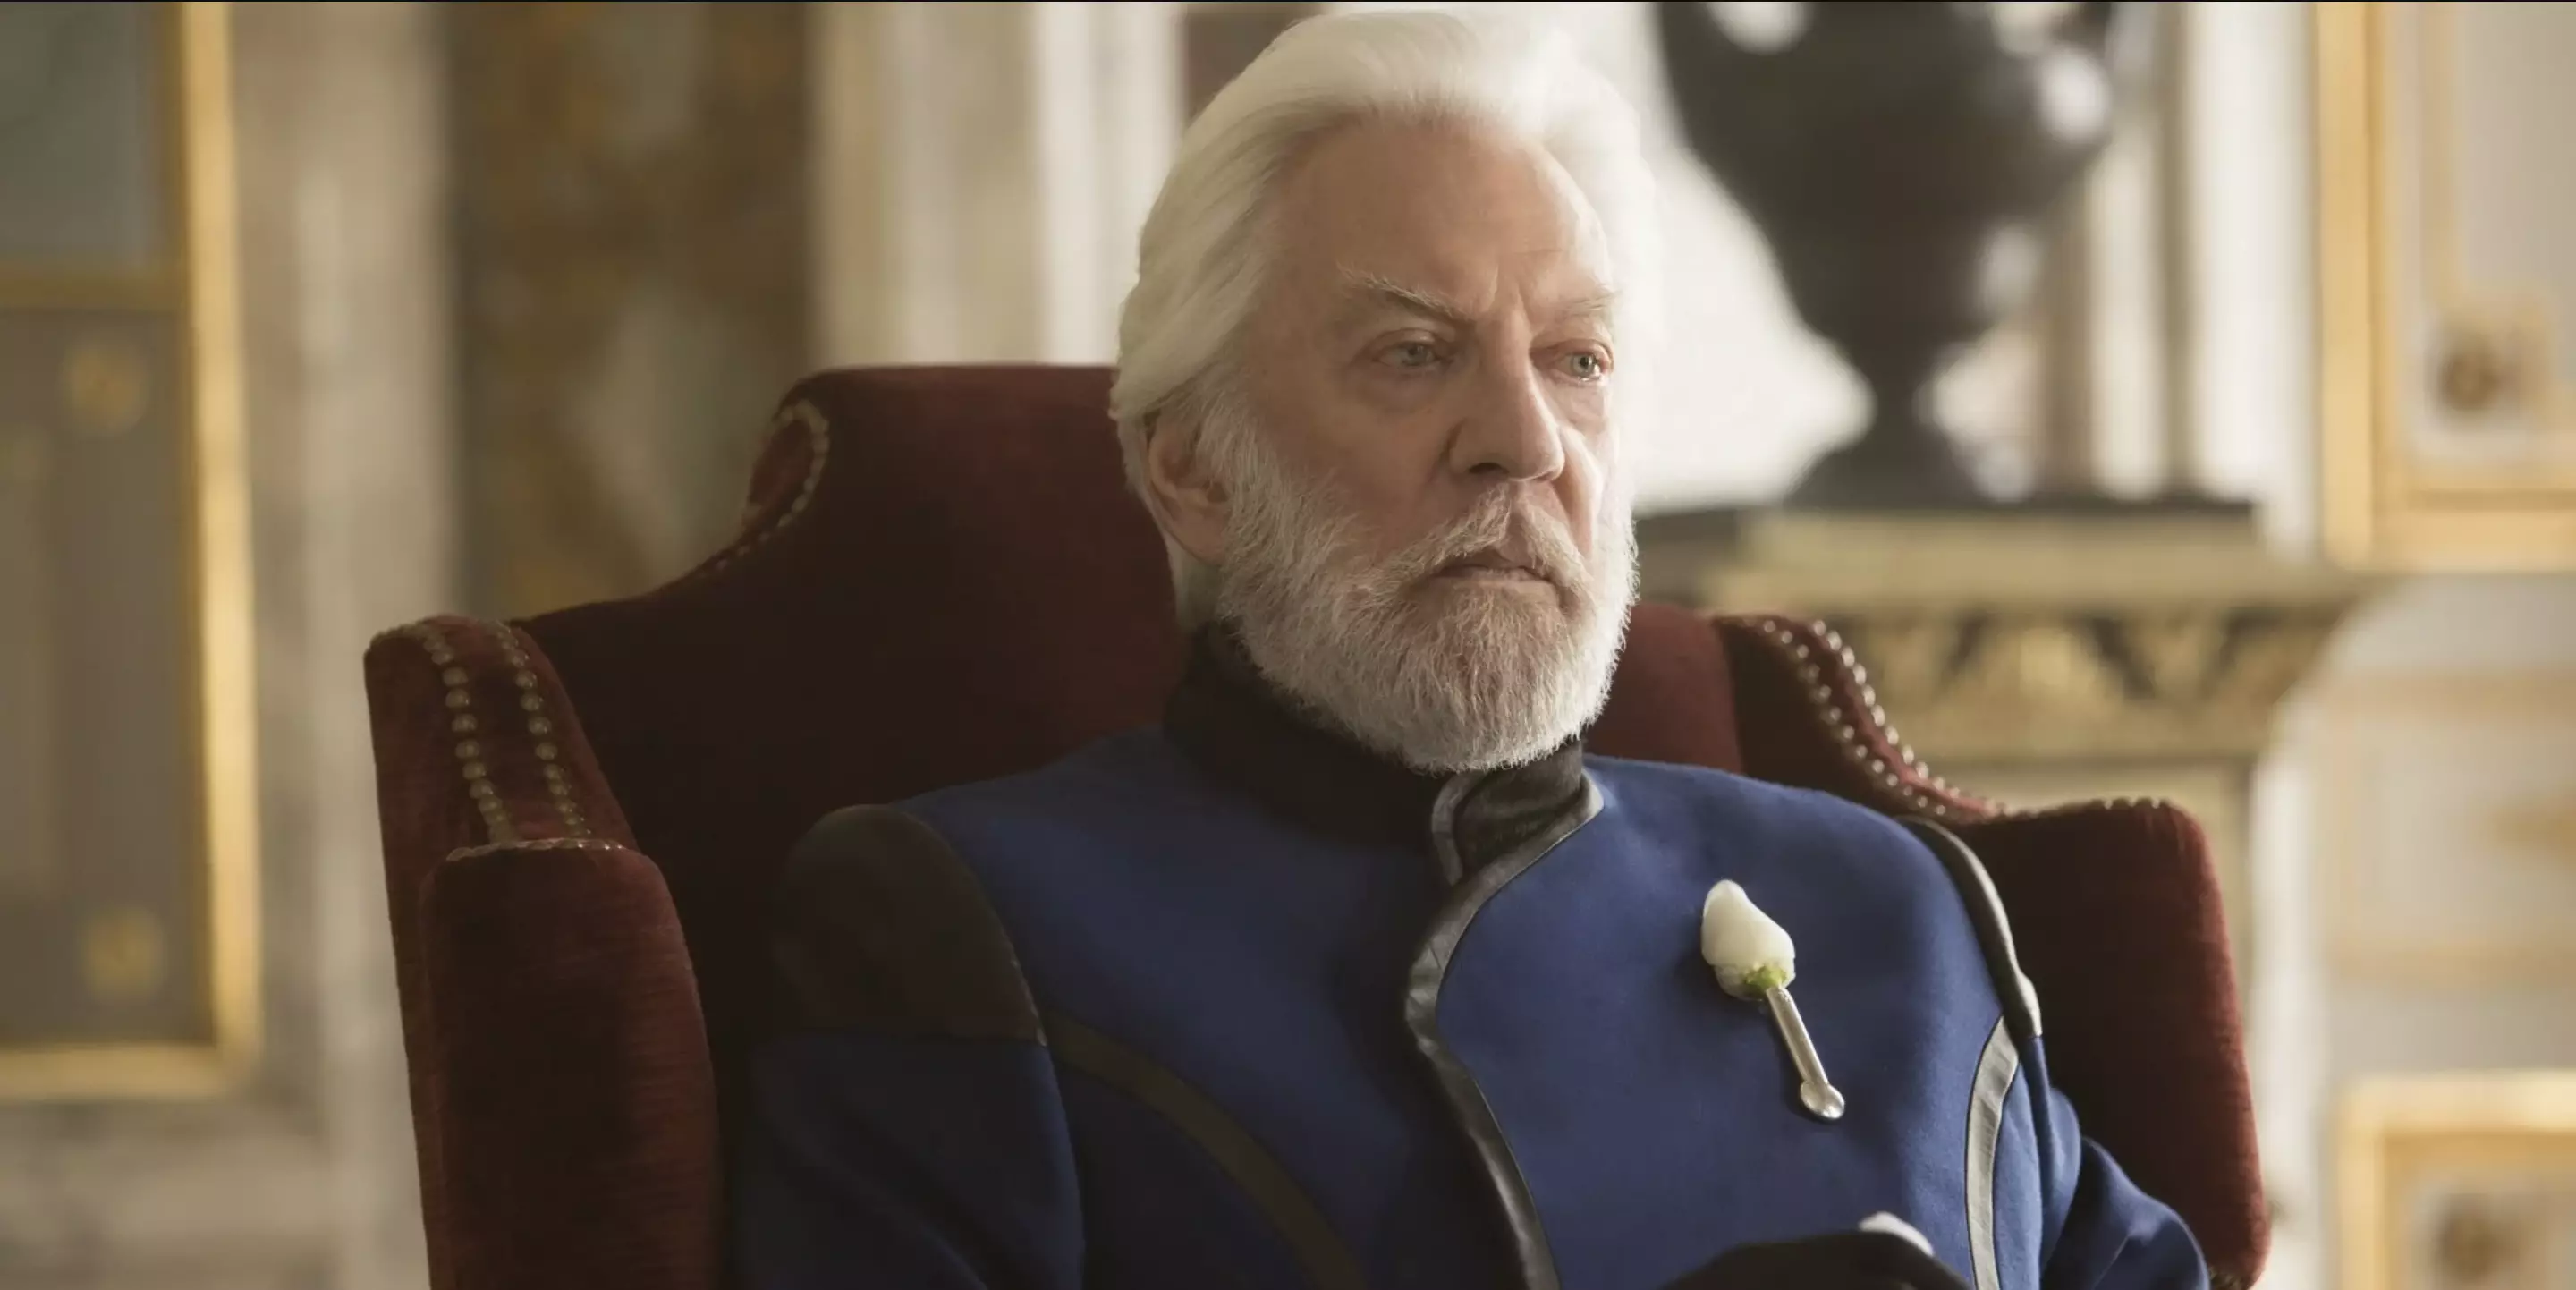 Donald Sutherland played the older Coriolanus Snow in the franchise (